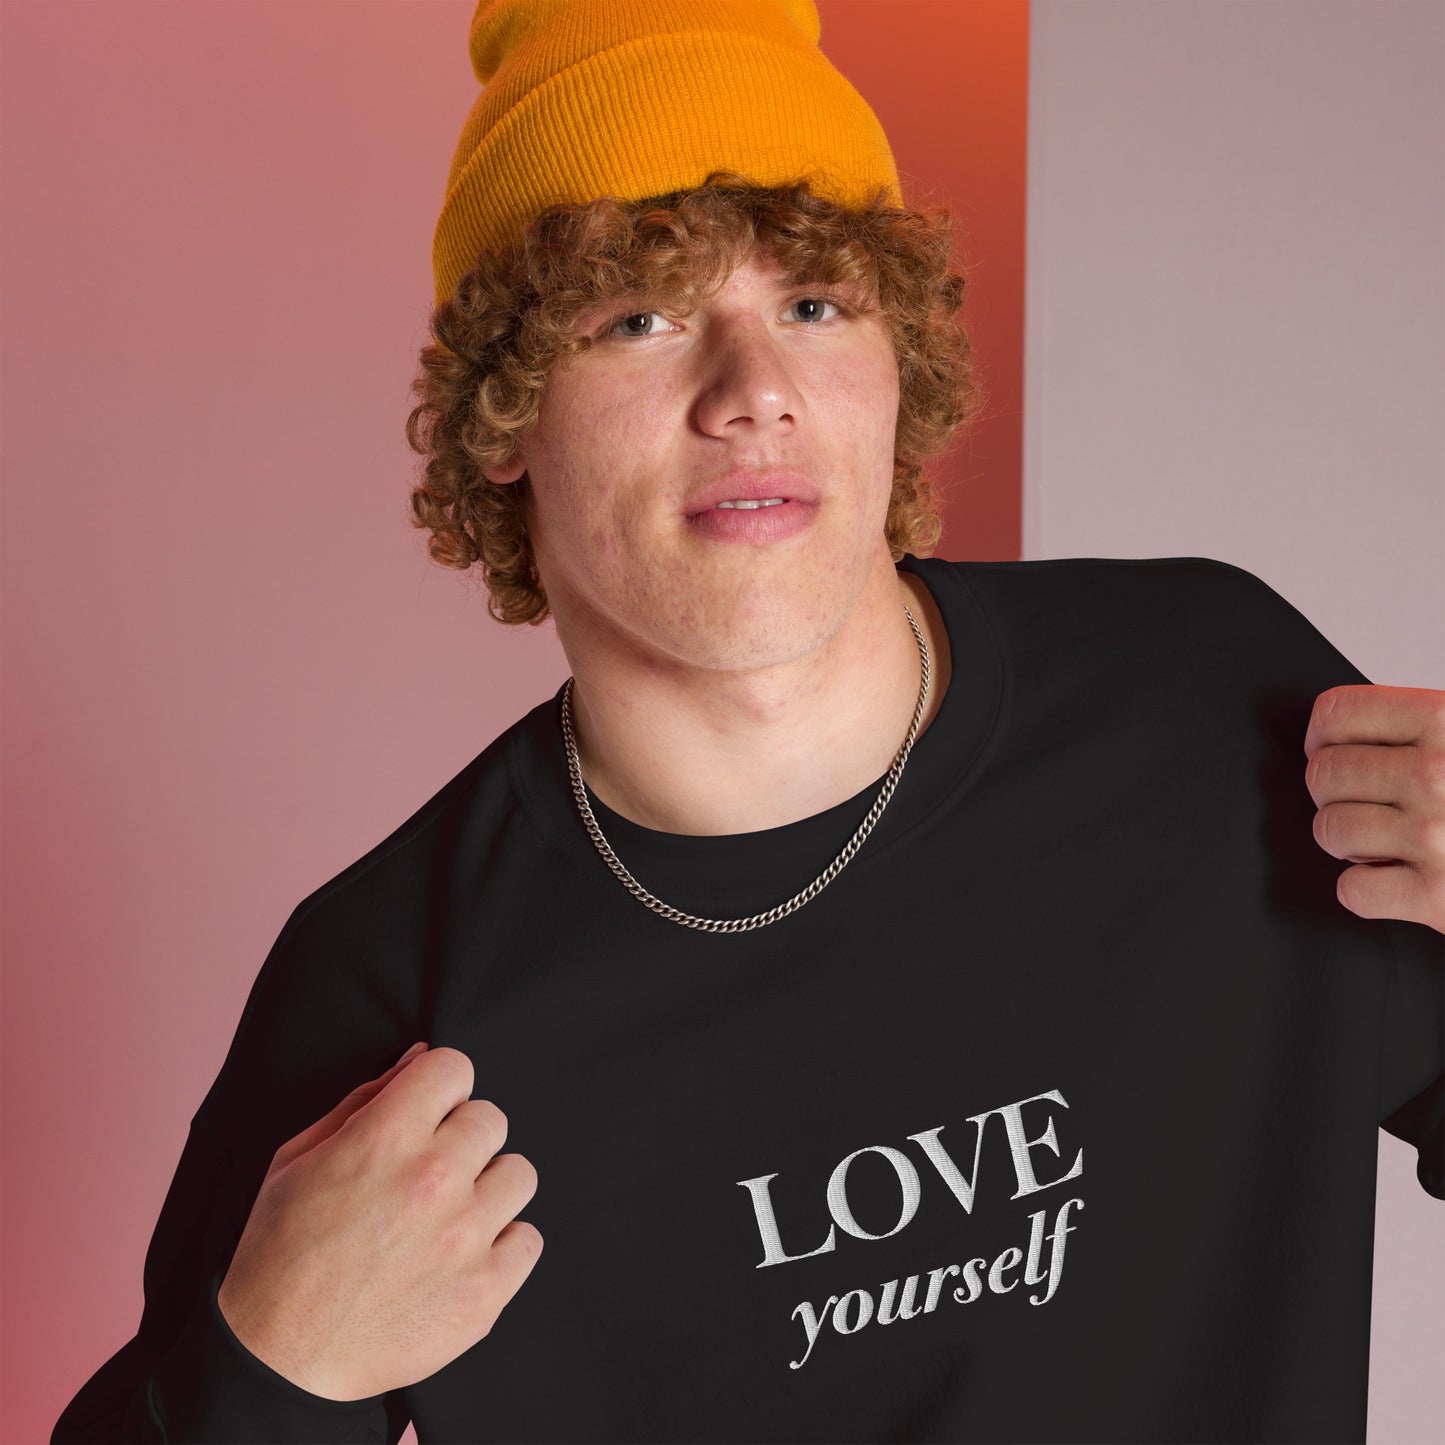 "LOVE yourself" with "you are lovable" (Left Sleeve) Embroidered Sweatshirt